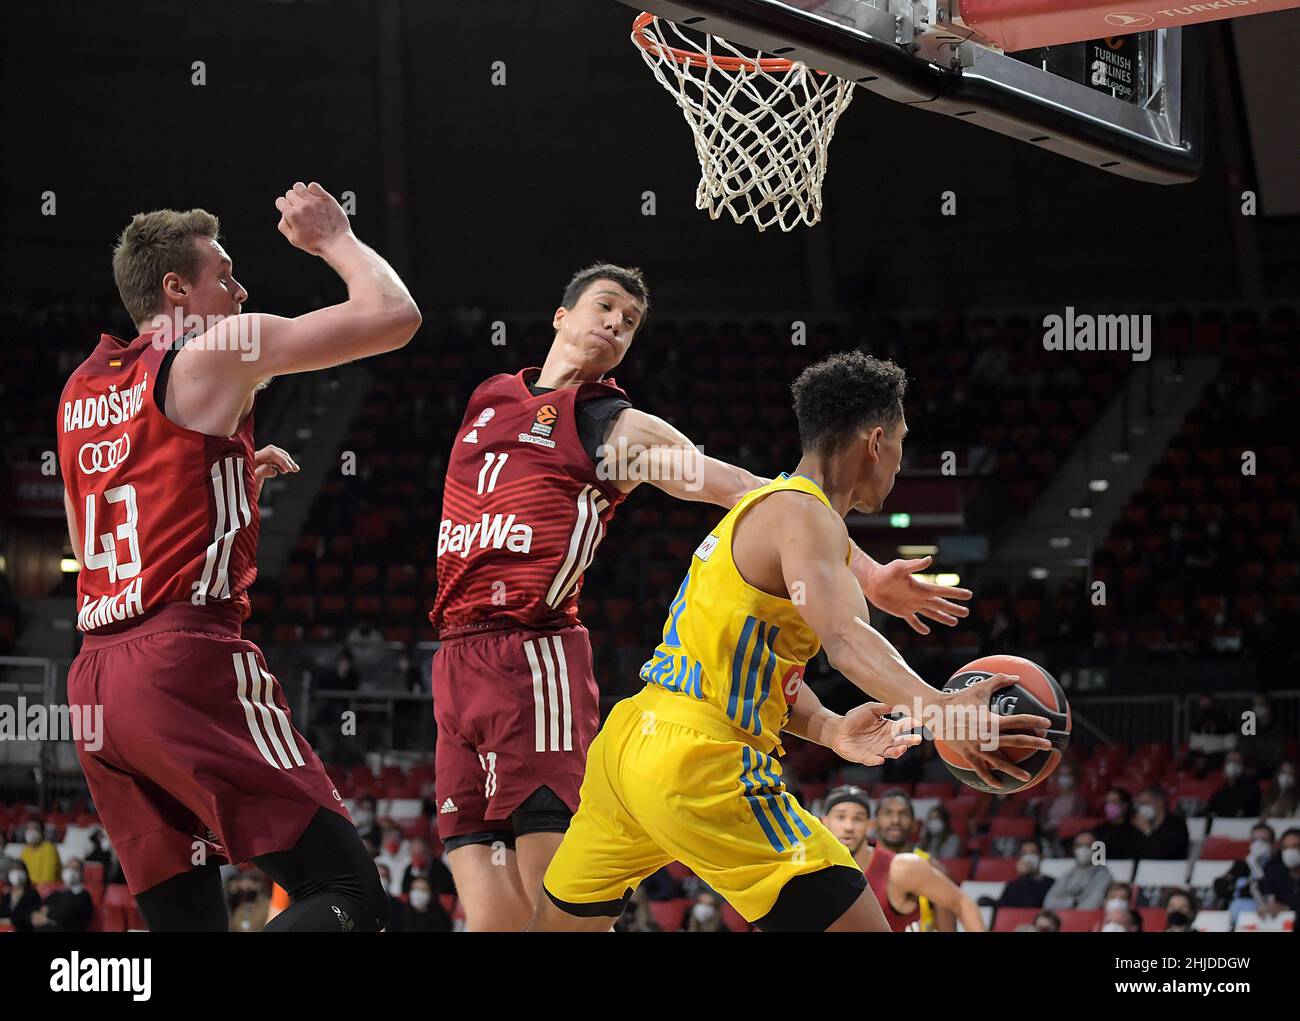 Muenchen, Germany (DE), 28 January, 2022. Pictured left to right, Leon Radosevic (FC Bayern Basketball), Vladimir Lucic (FC Bayern Basketball), Maodo Lo (Alba Berlin) Zweikampf, Aktion, action, battle for the ball at the Basketball Euroleague, FC Bayern Muenchen - Alba Berlin. Credit: Eduard Martin/Alamy Live News Stock Photo